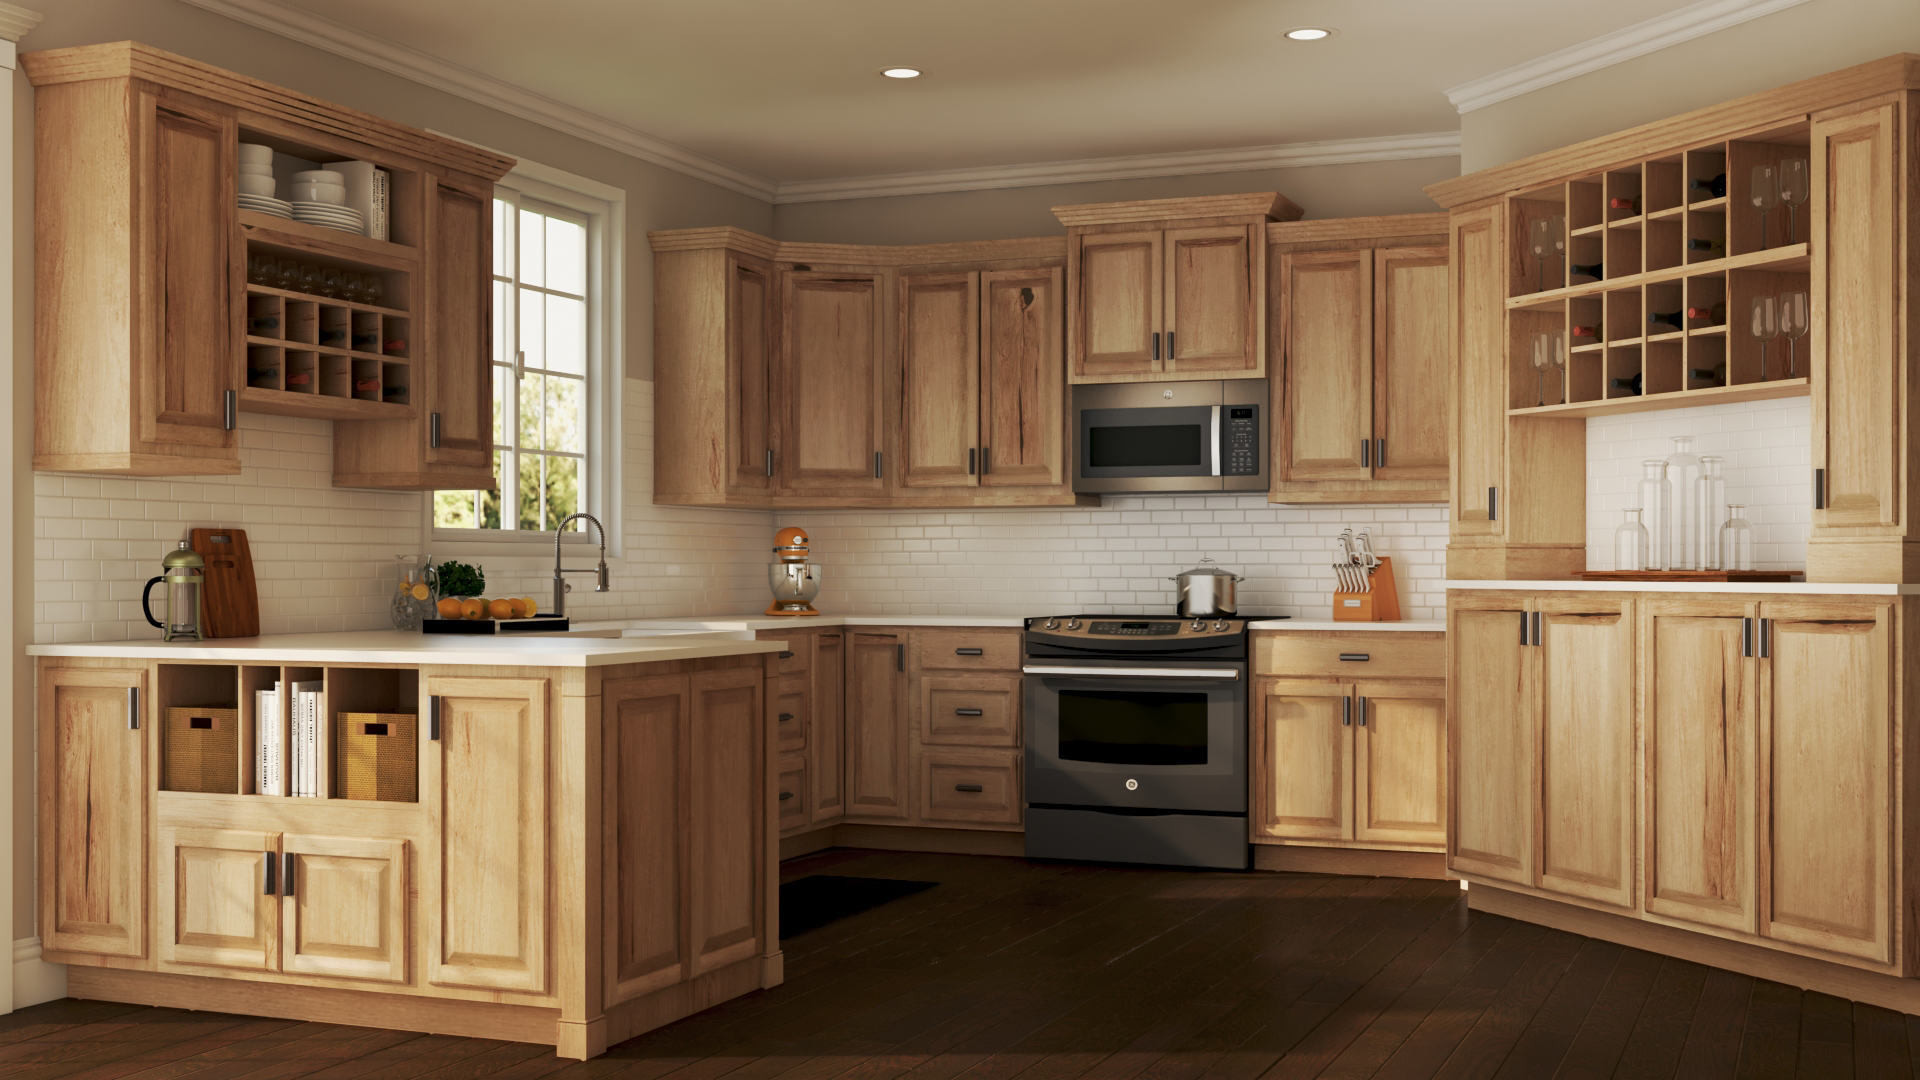 Home Depot Kitchen Cabinet Paint
 Hampton Bath Cabinets in Natural Hickory – Kitchen – The